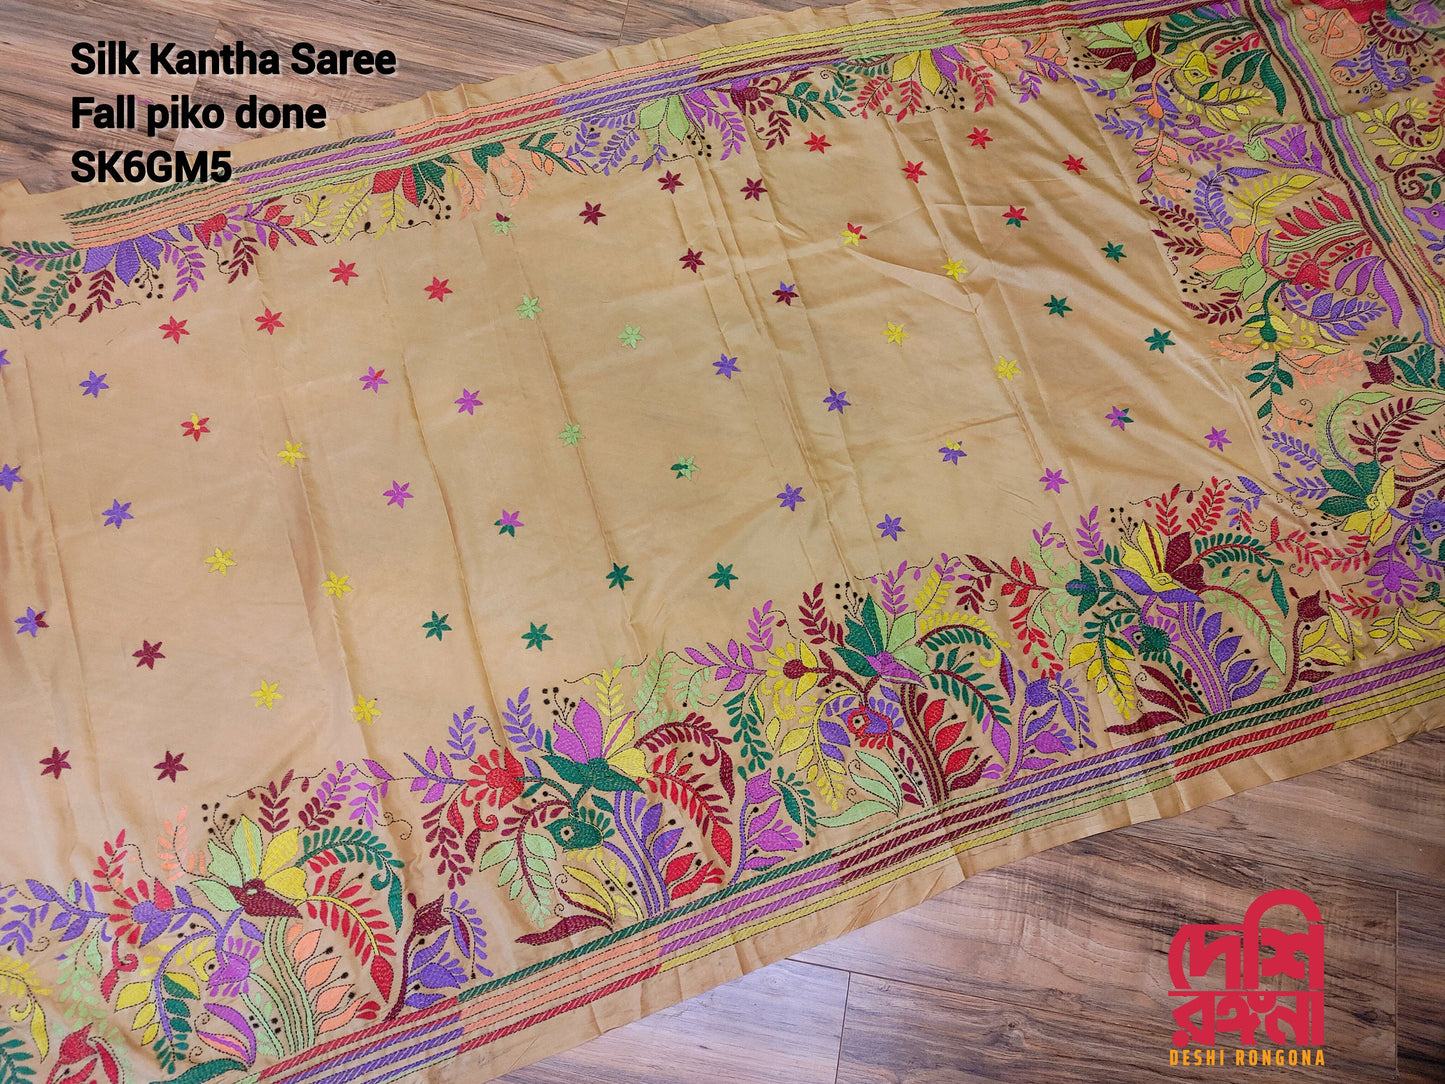 Extraordinary Hand Stiched Kantha Saree, Golden Bangalore Silk with Multi color Kantha Works, Fall piko done, Elegant, Classy Party Saree